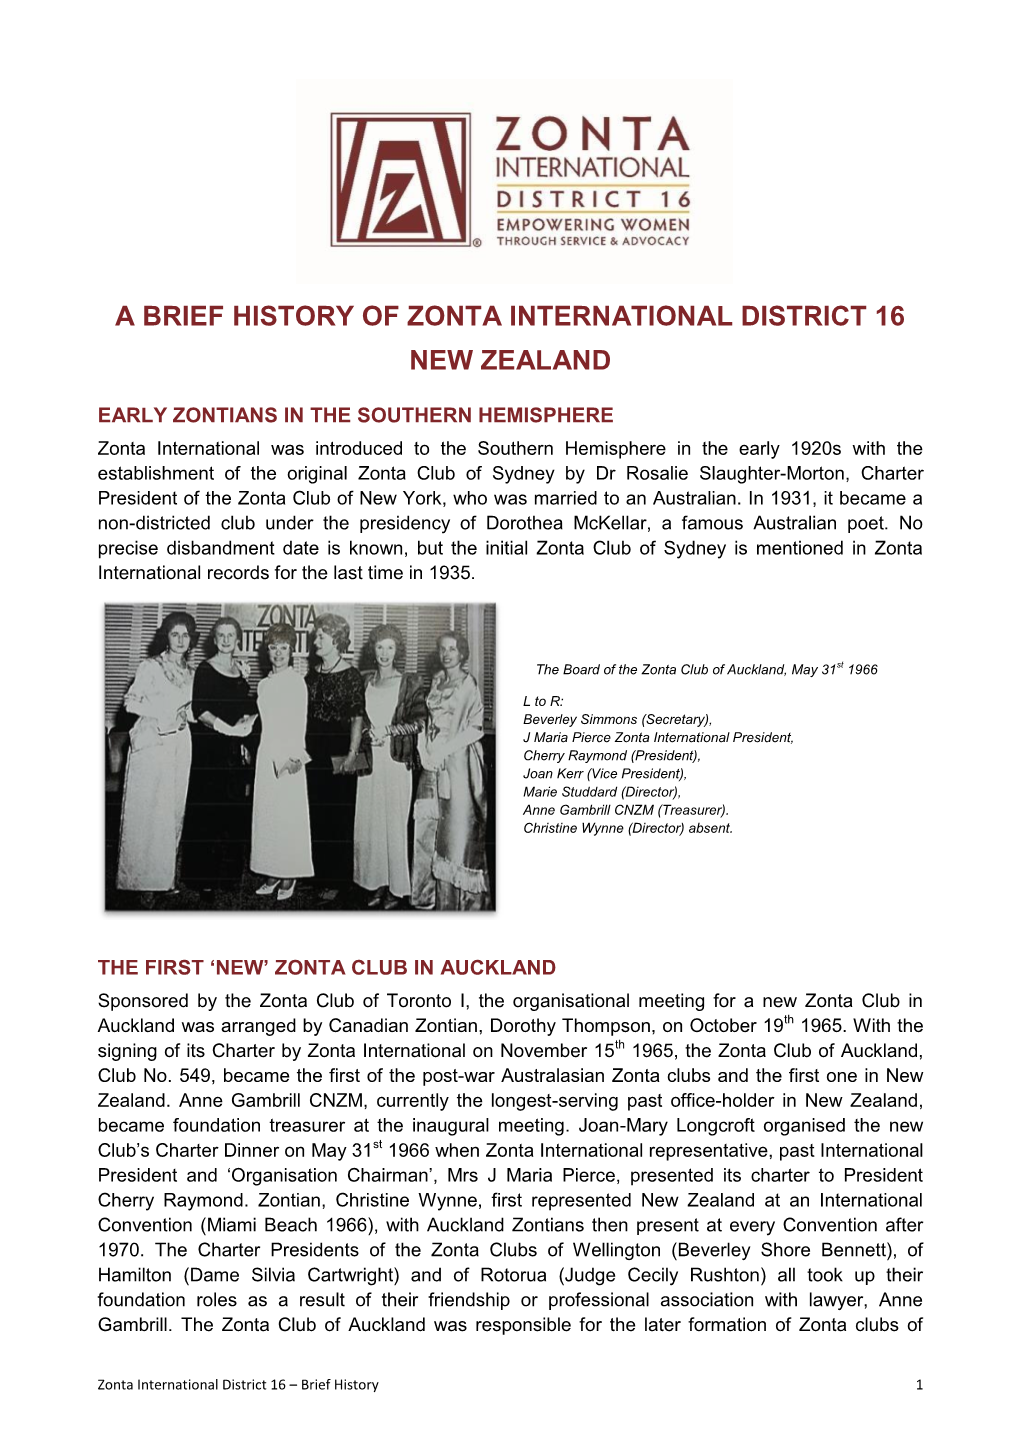 A Brief History of Zonta International District 16 New Zealand